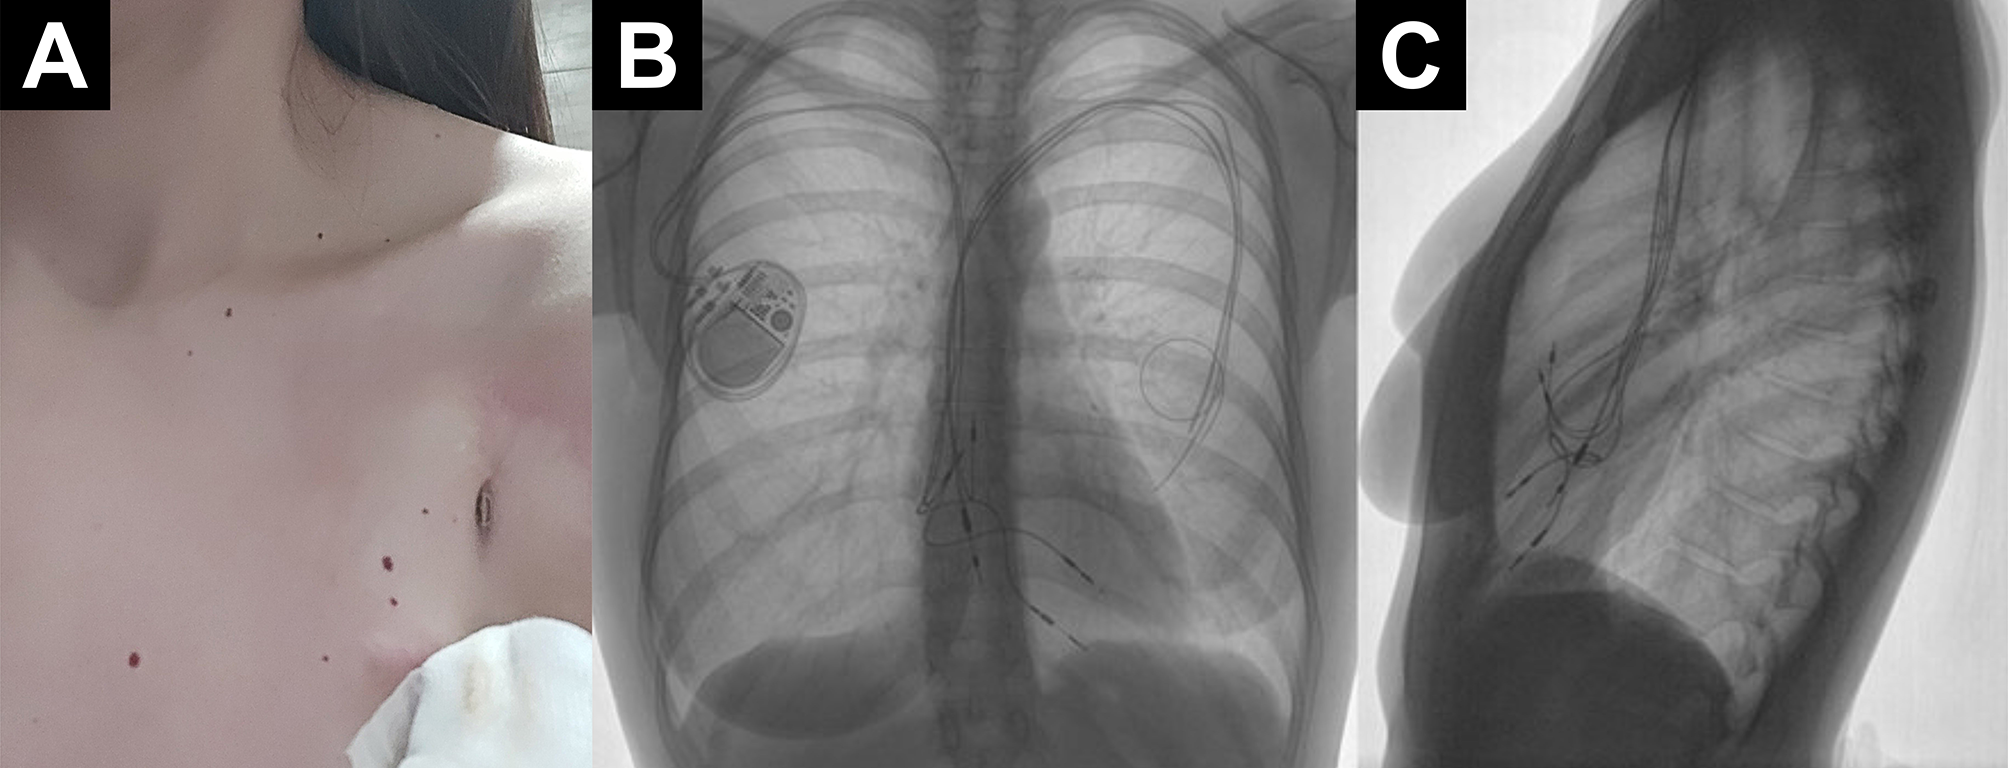 Stepwise transvenous lead extraction due to pacemaker pocket infection following lactational mastitis complicated with breast abscess